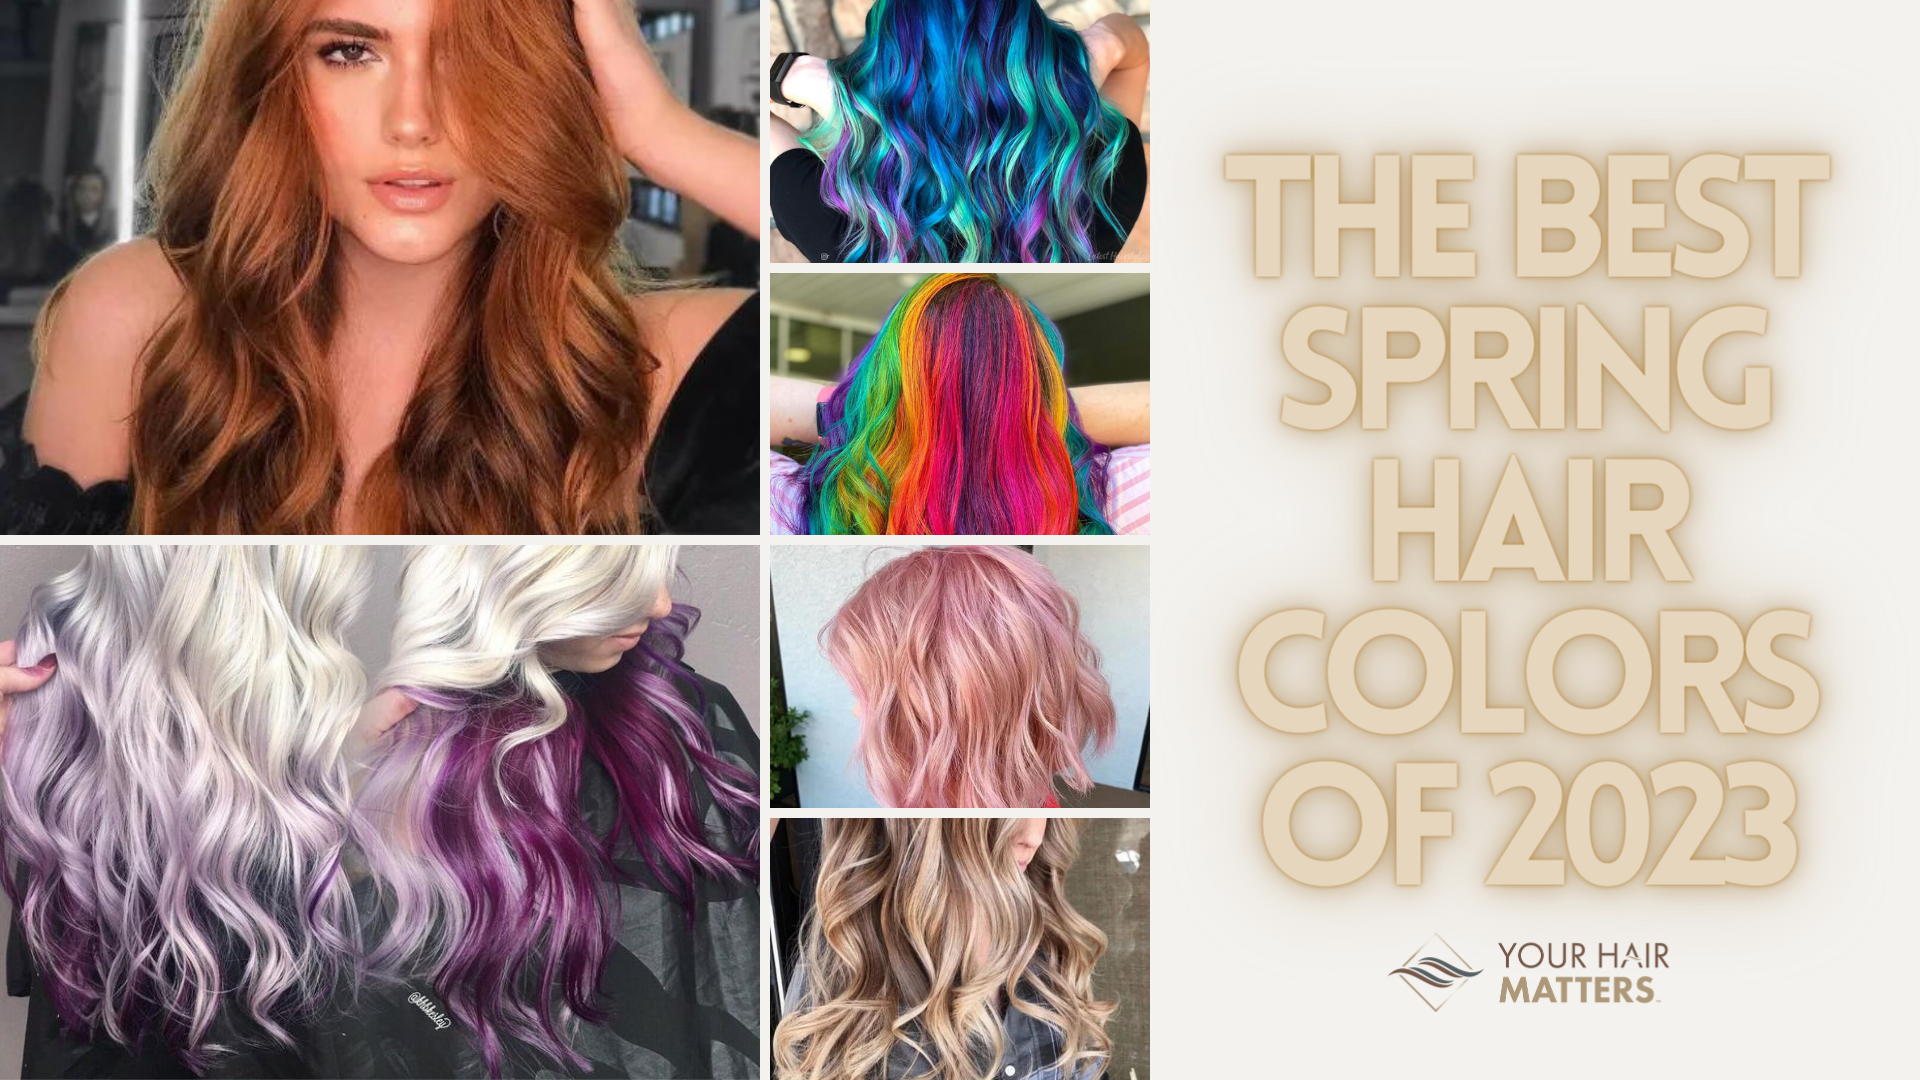 The Best Spring Hair Colors for 2023